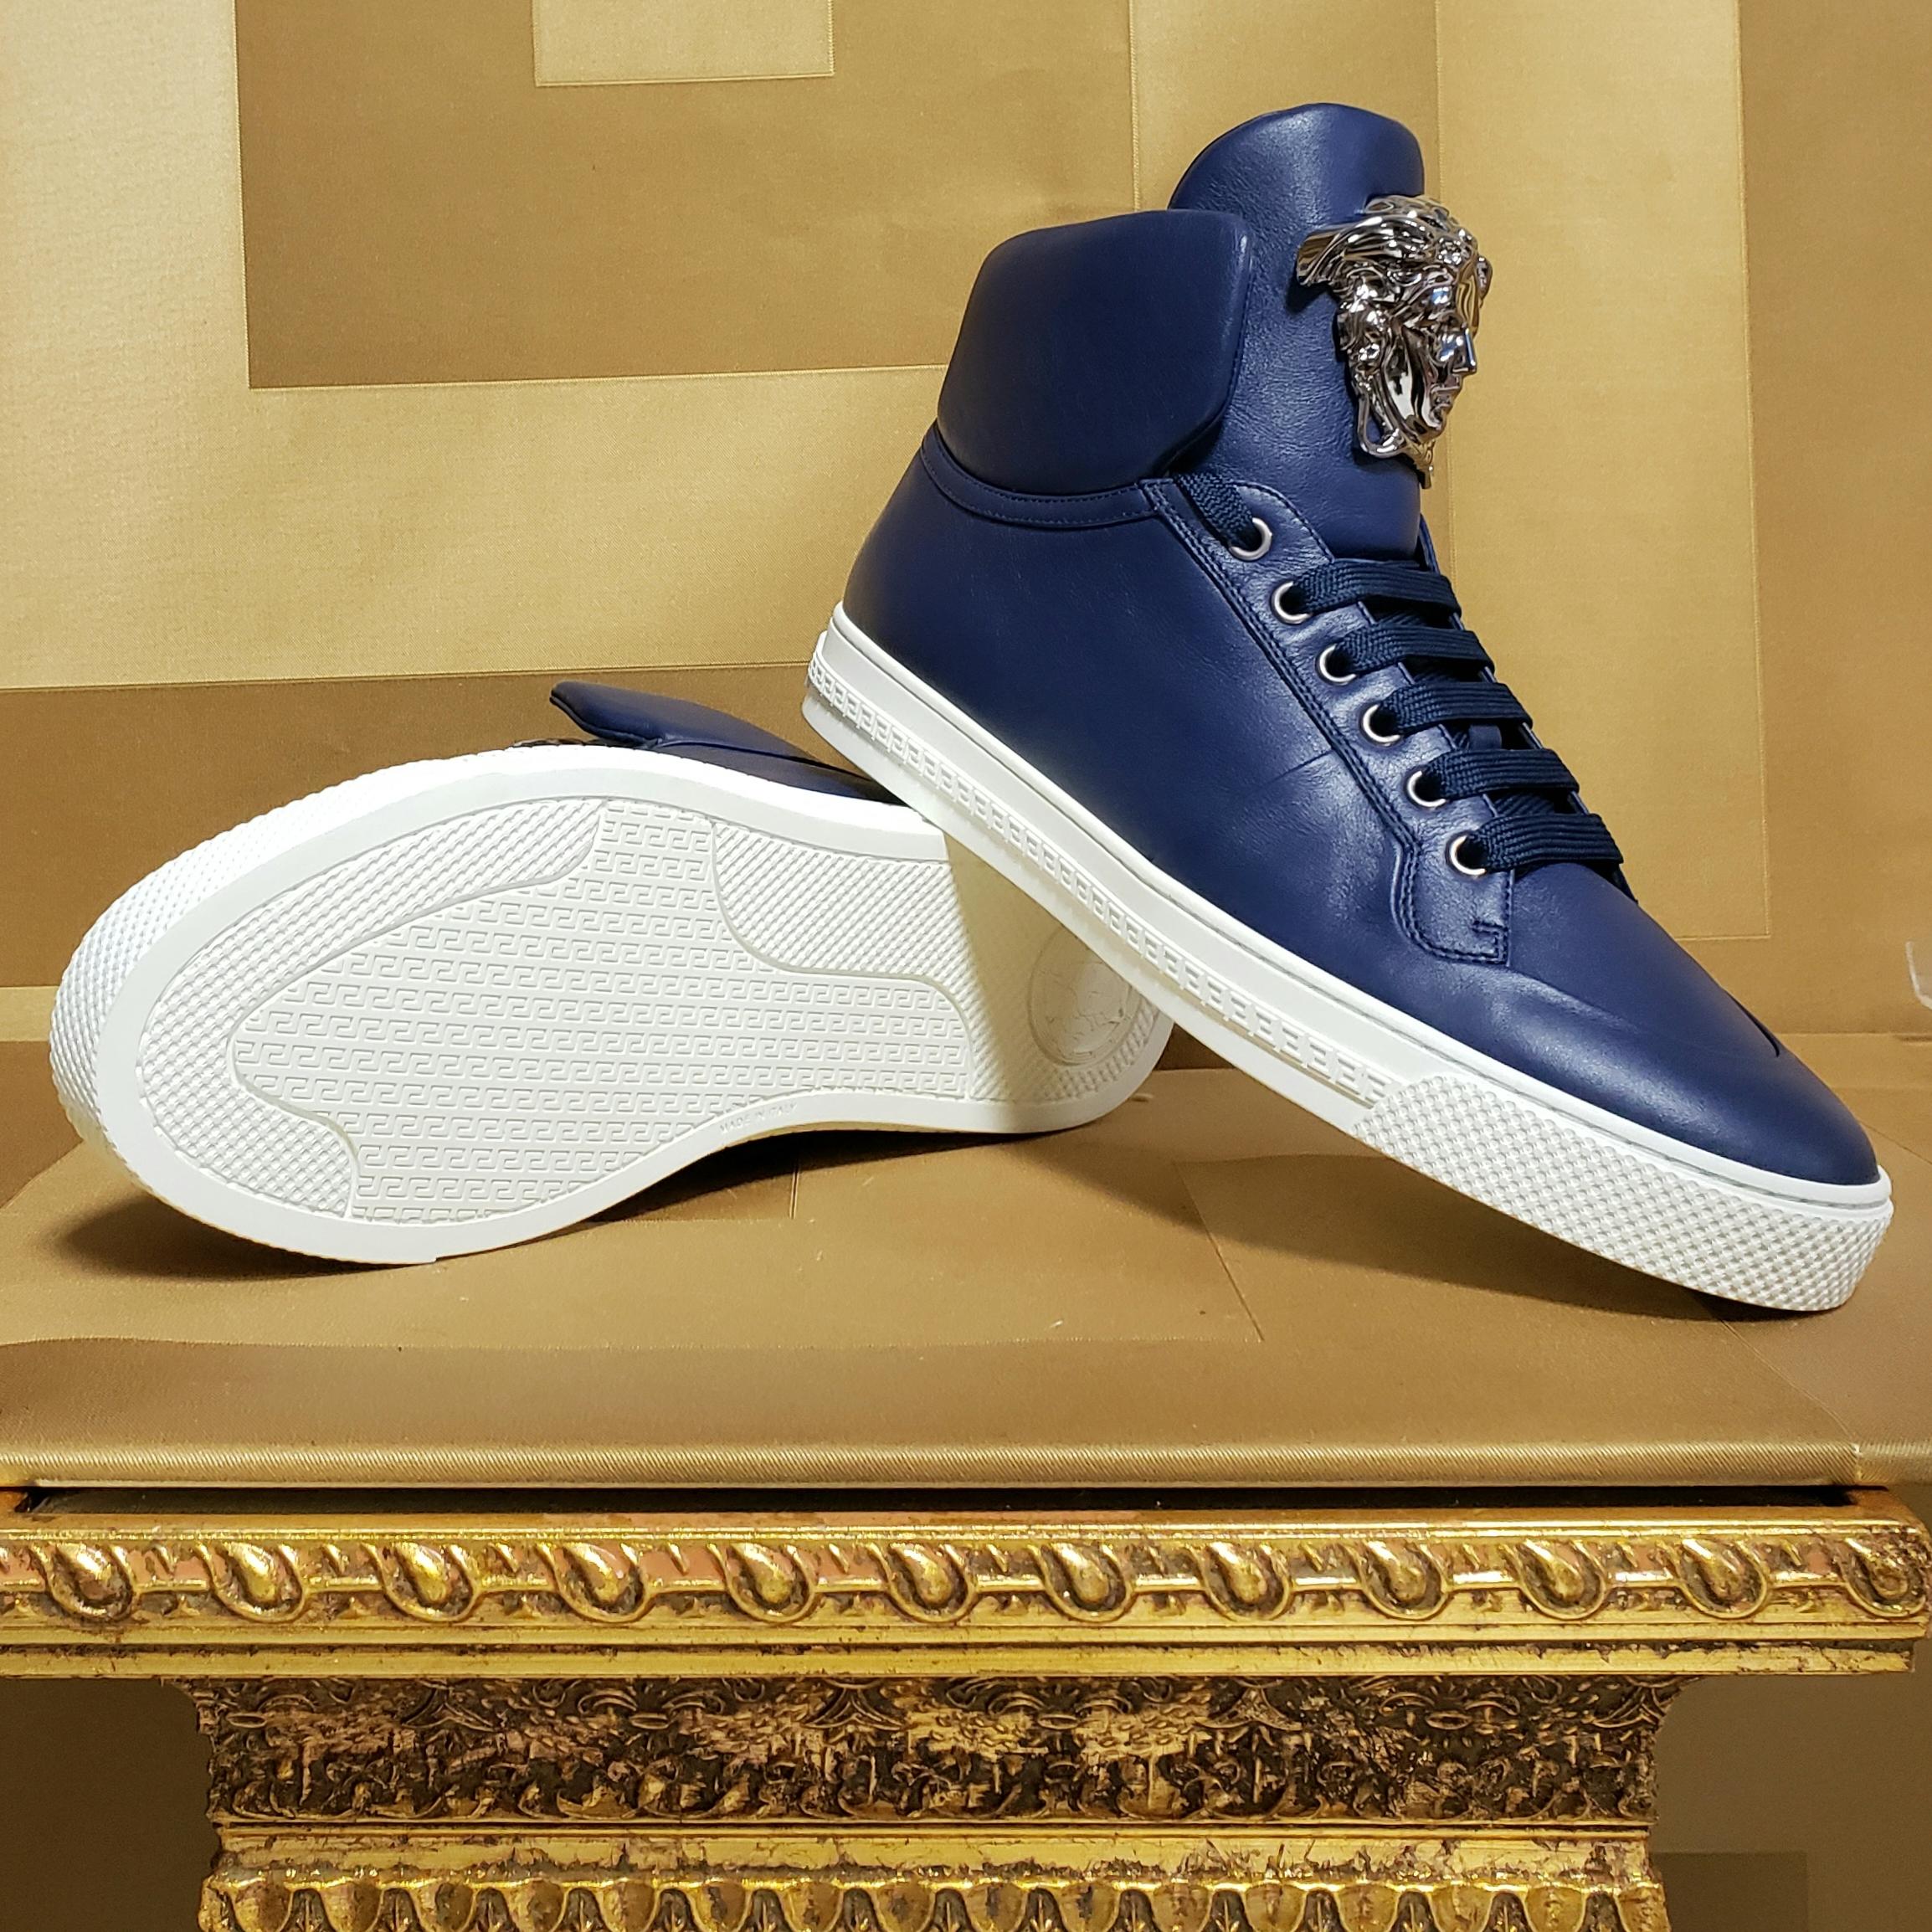 VERSACE 

Palazzo sneakers 

This shoe is embodied in true Versace-style and

 features blue leather with gold iconic Medusa. It wouldn’t be Versace without it.

Made in Italy

Italian size is 39 - US 6 
insole: 10 1/2